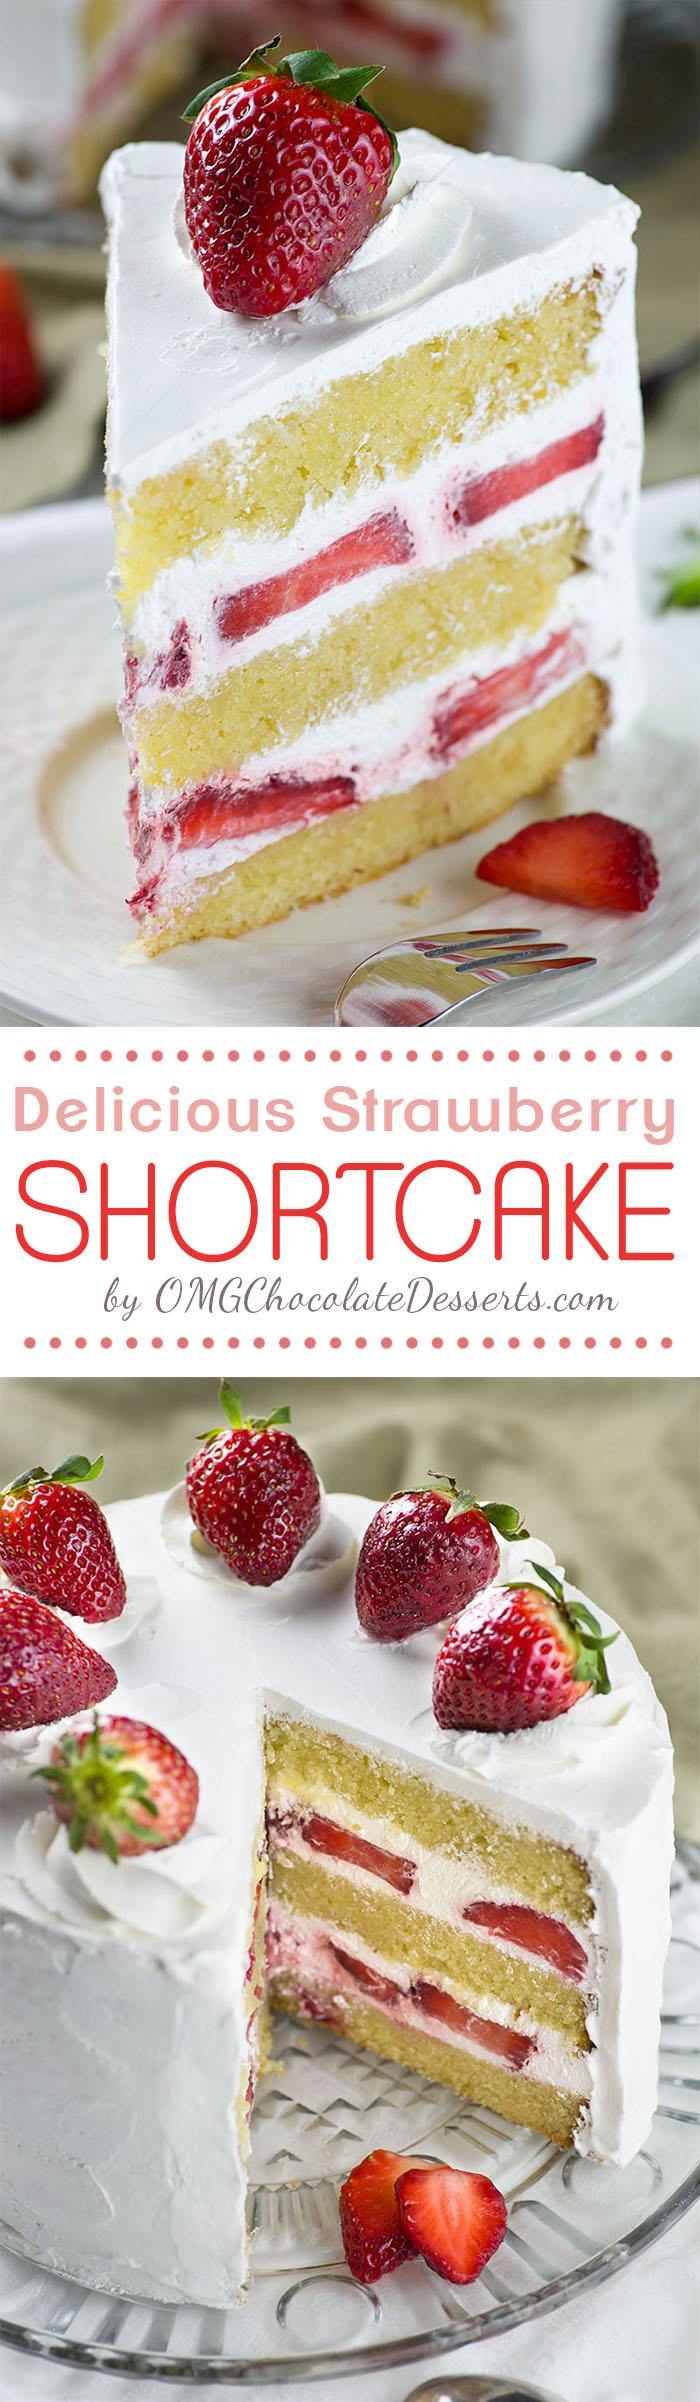 Strawberry Shortcake Cake - layers of dense, buttery and moist vanilla cake filled with fresh whipped cream and fresh sliced strawberries. Easy spring ( or summer ) dessert recipe to celebrate the arrival of my favorite season.